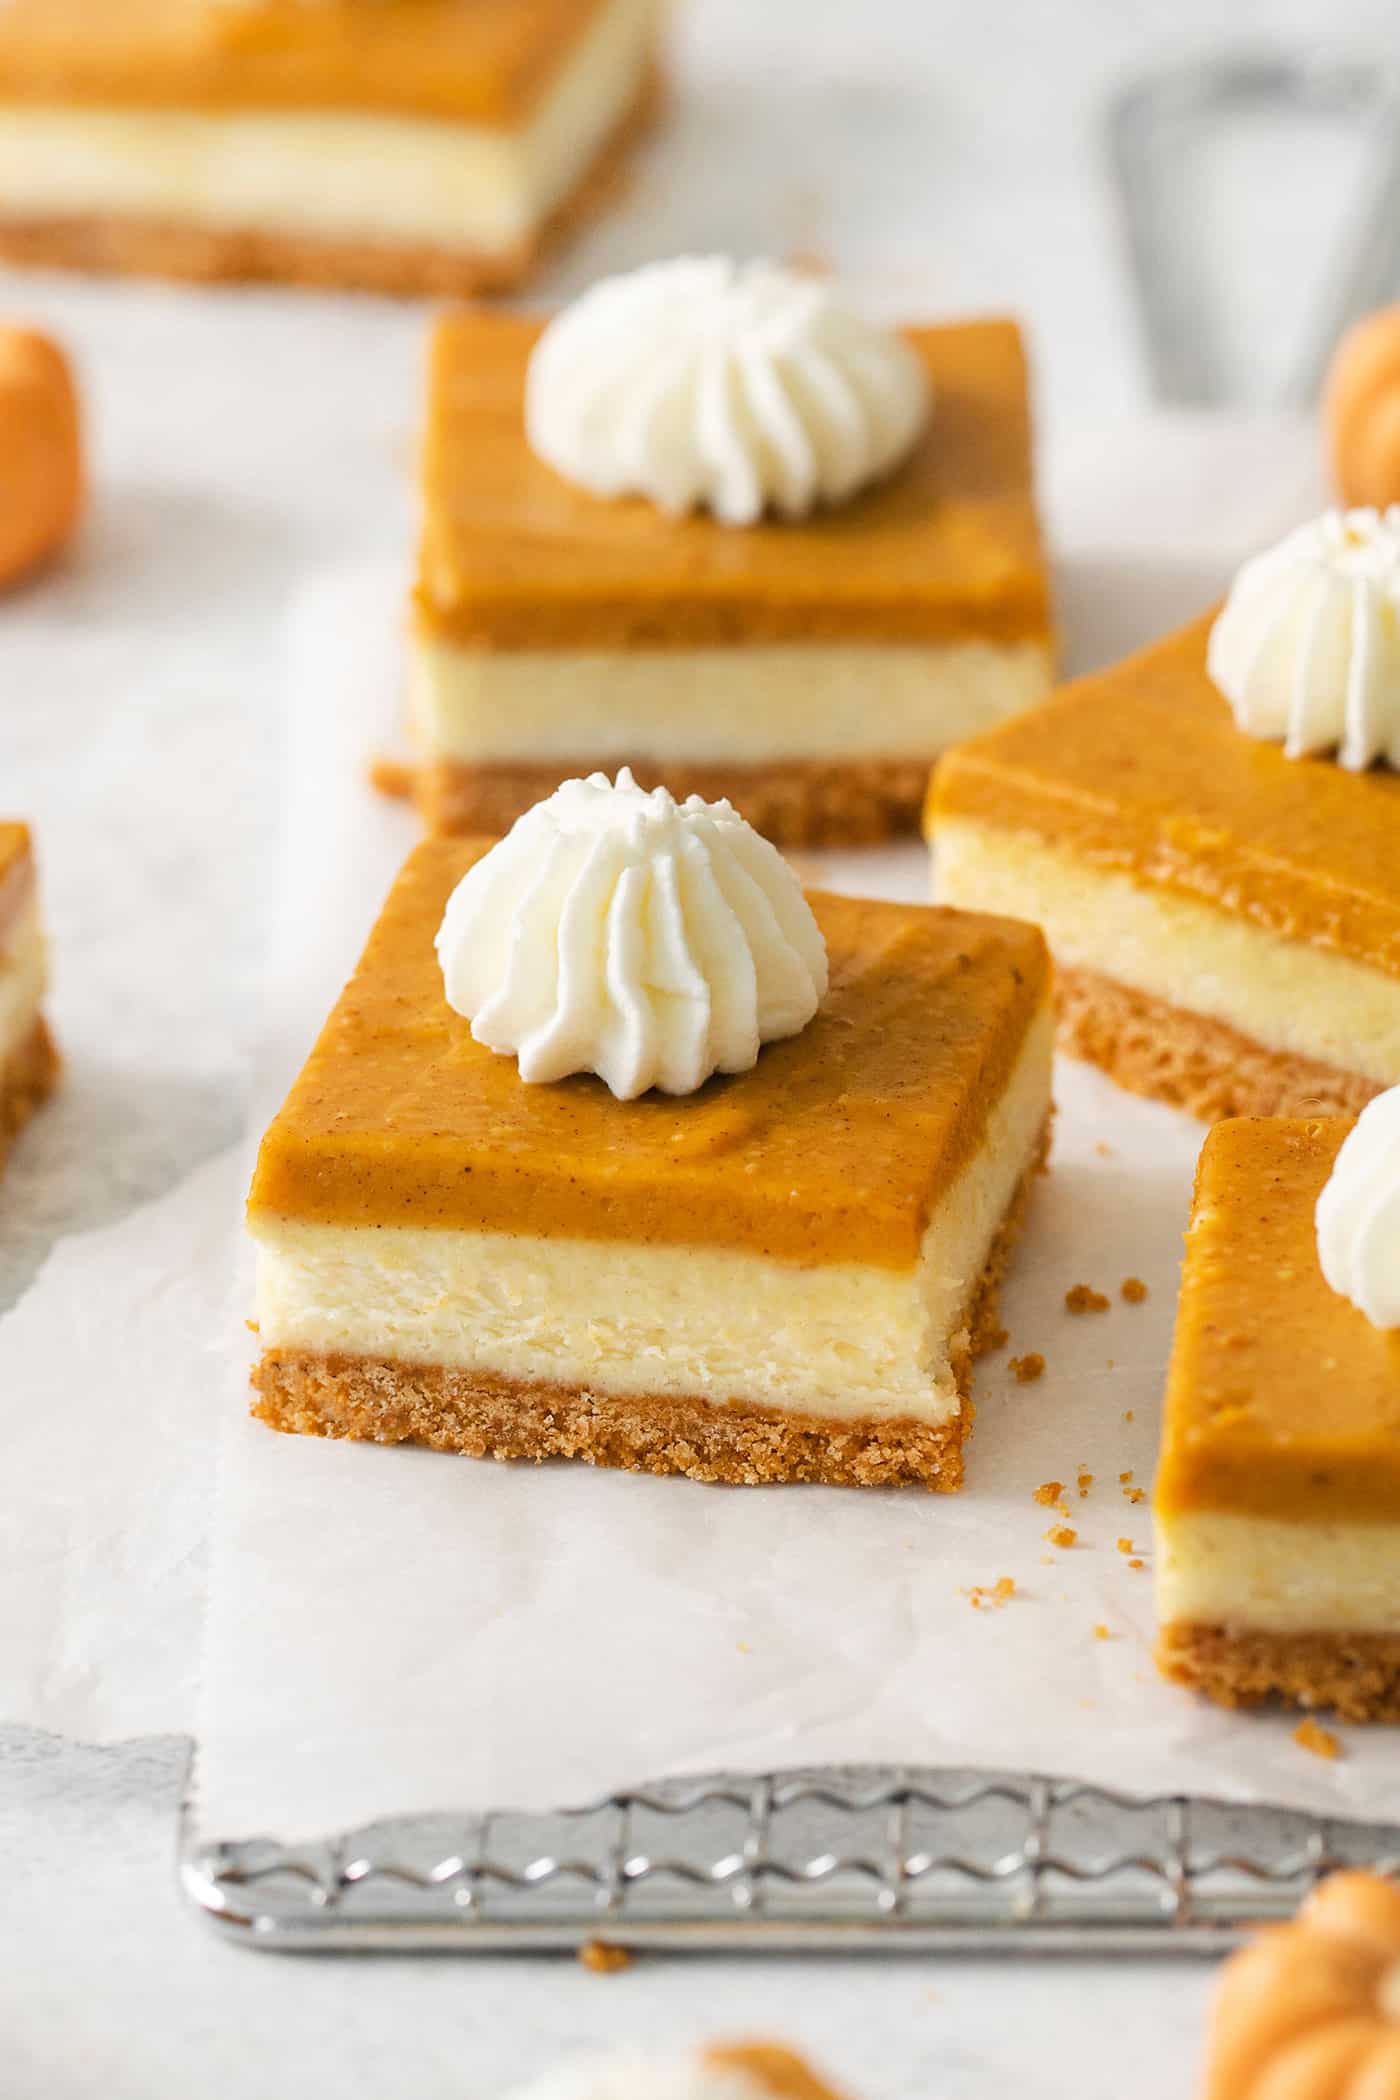 Pumpkin cheesecake bars are shown on a white backgrounf.